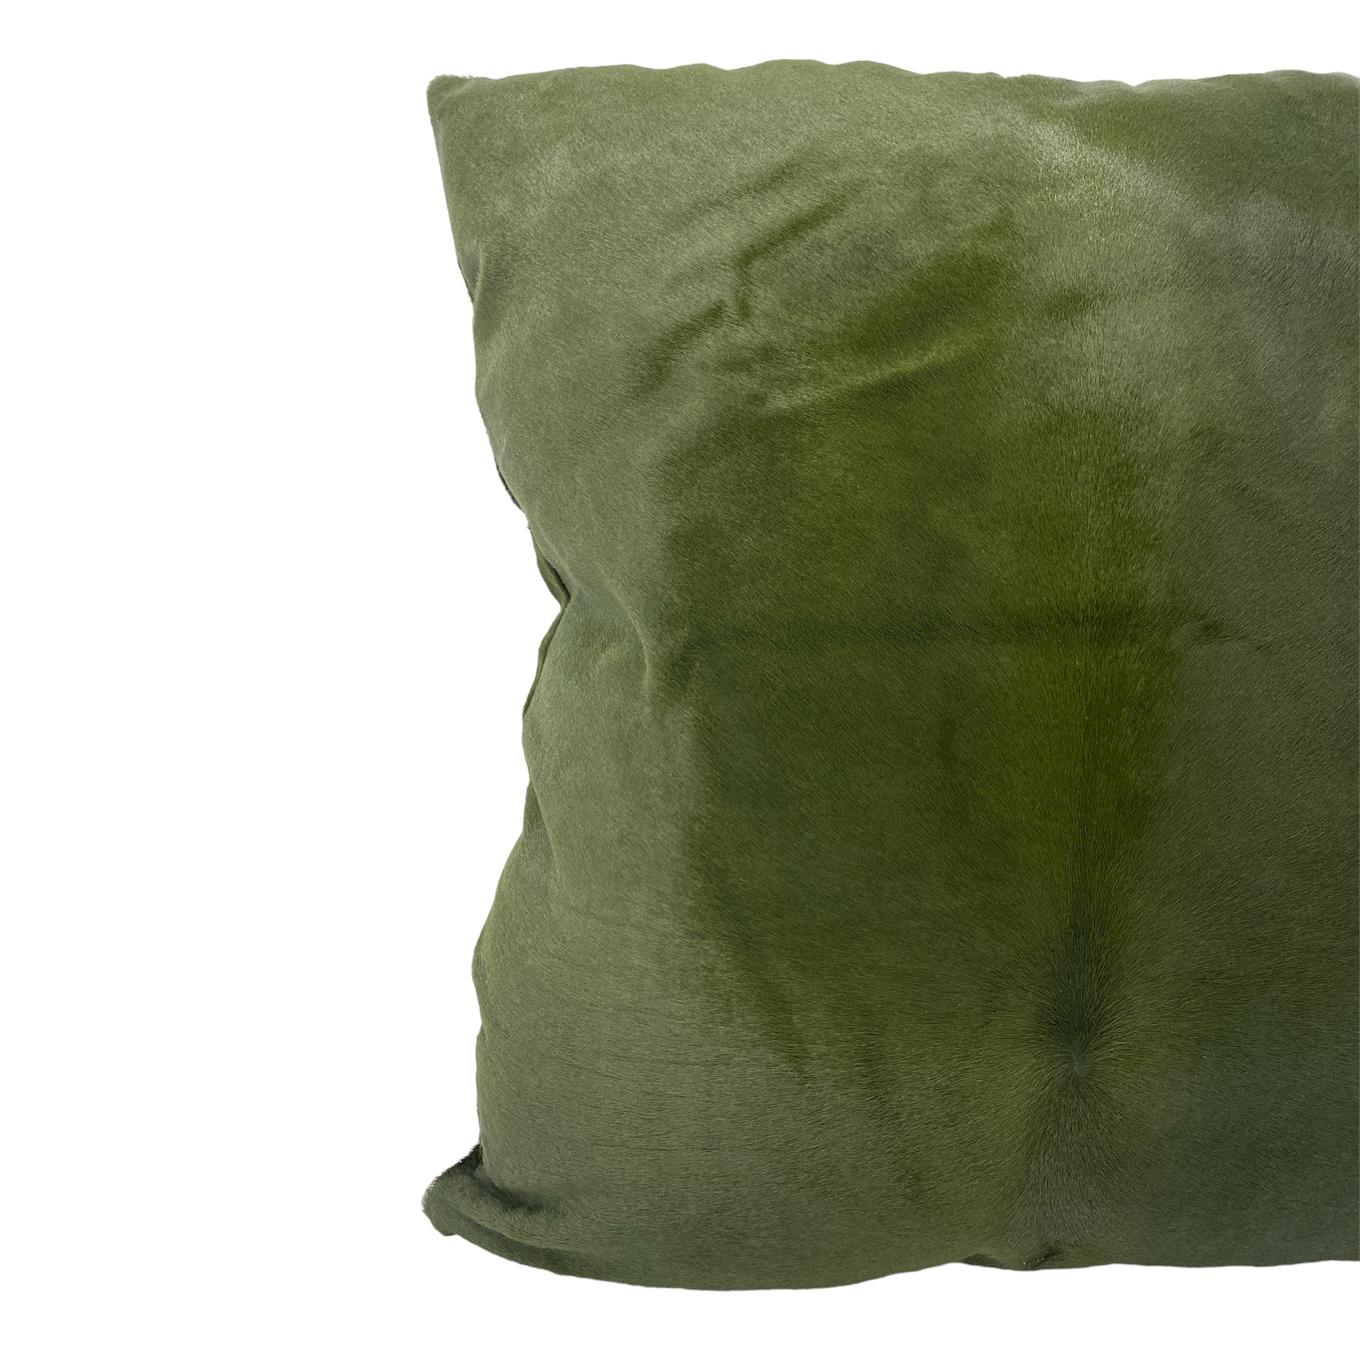 American Green Leather Throw Pillow For Sale